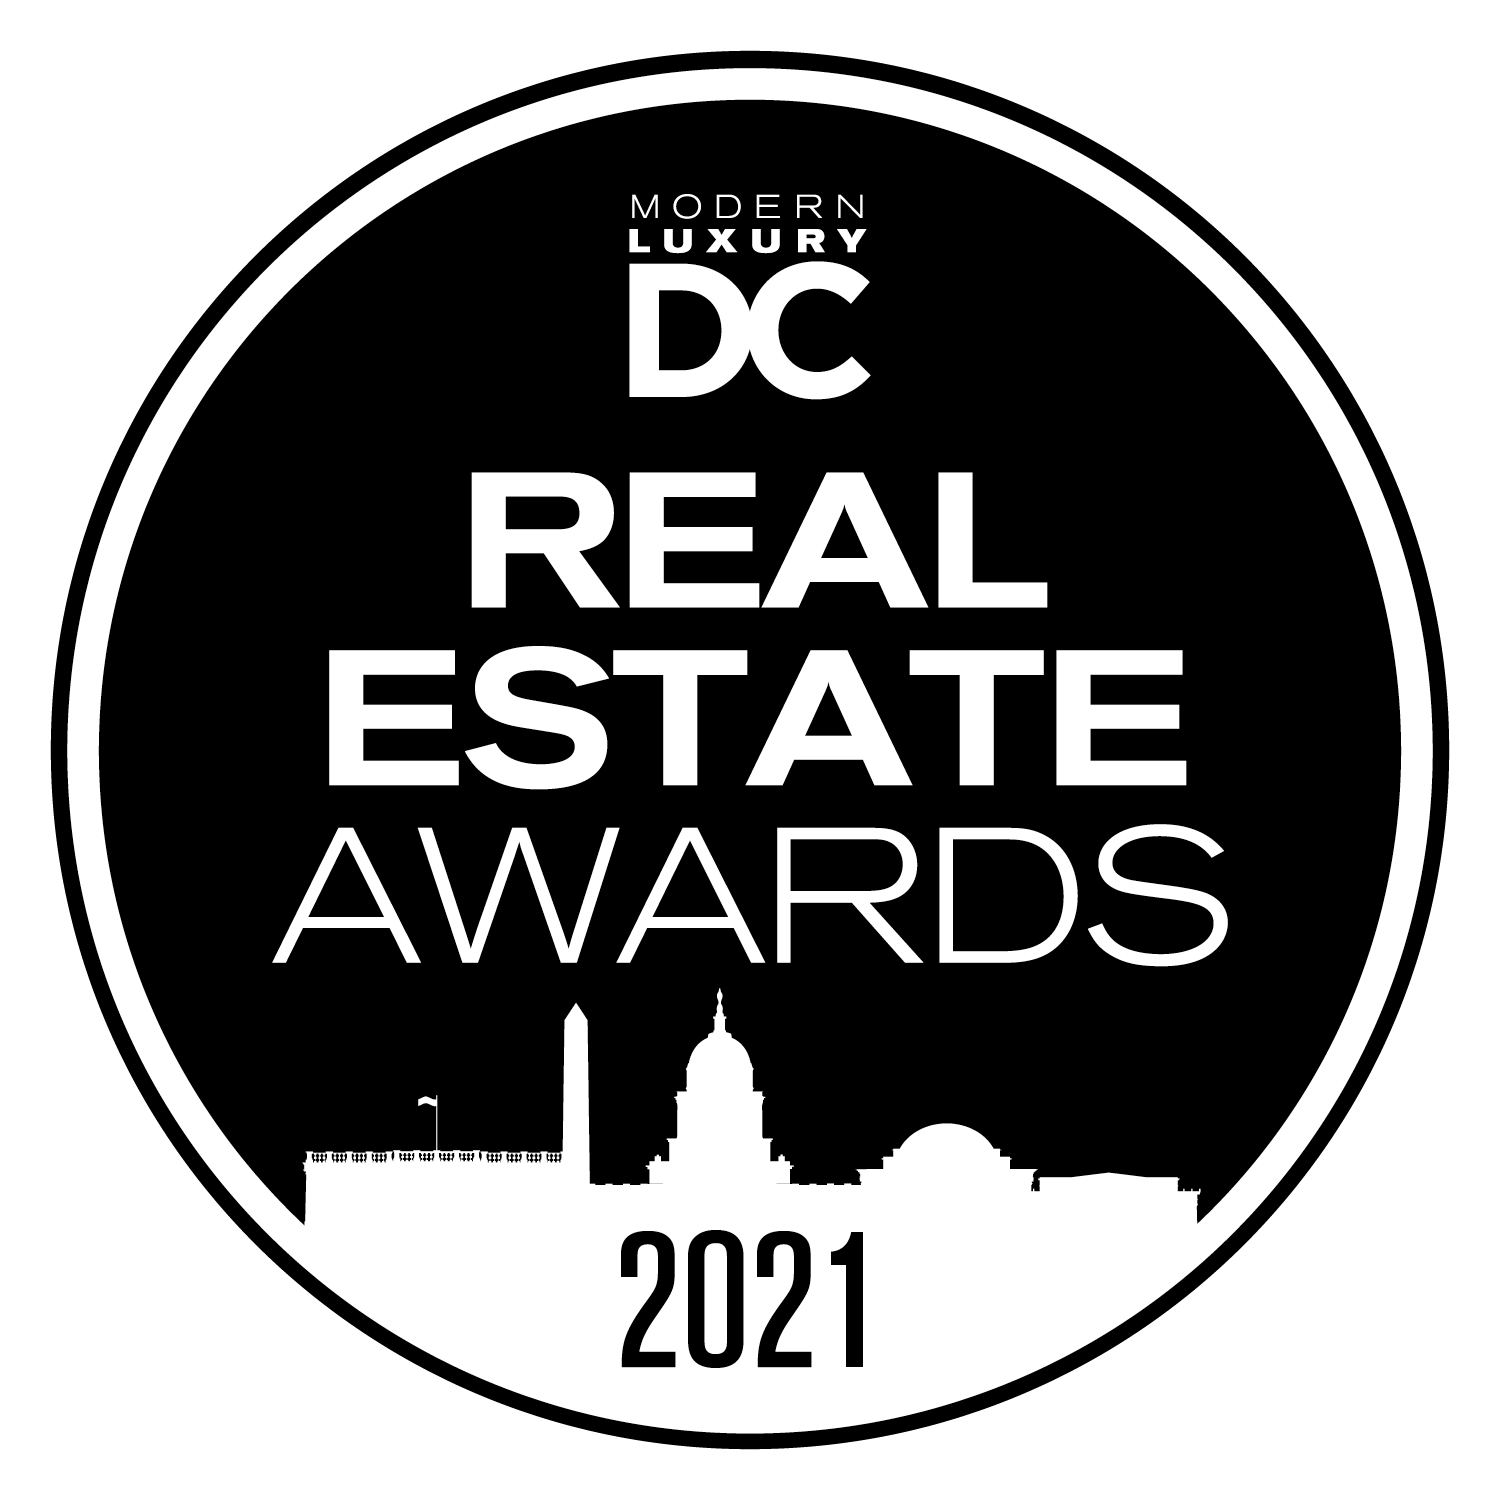 Copy of Modern Luxury Real Estate Awards 2021.png